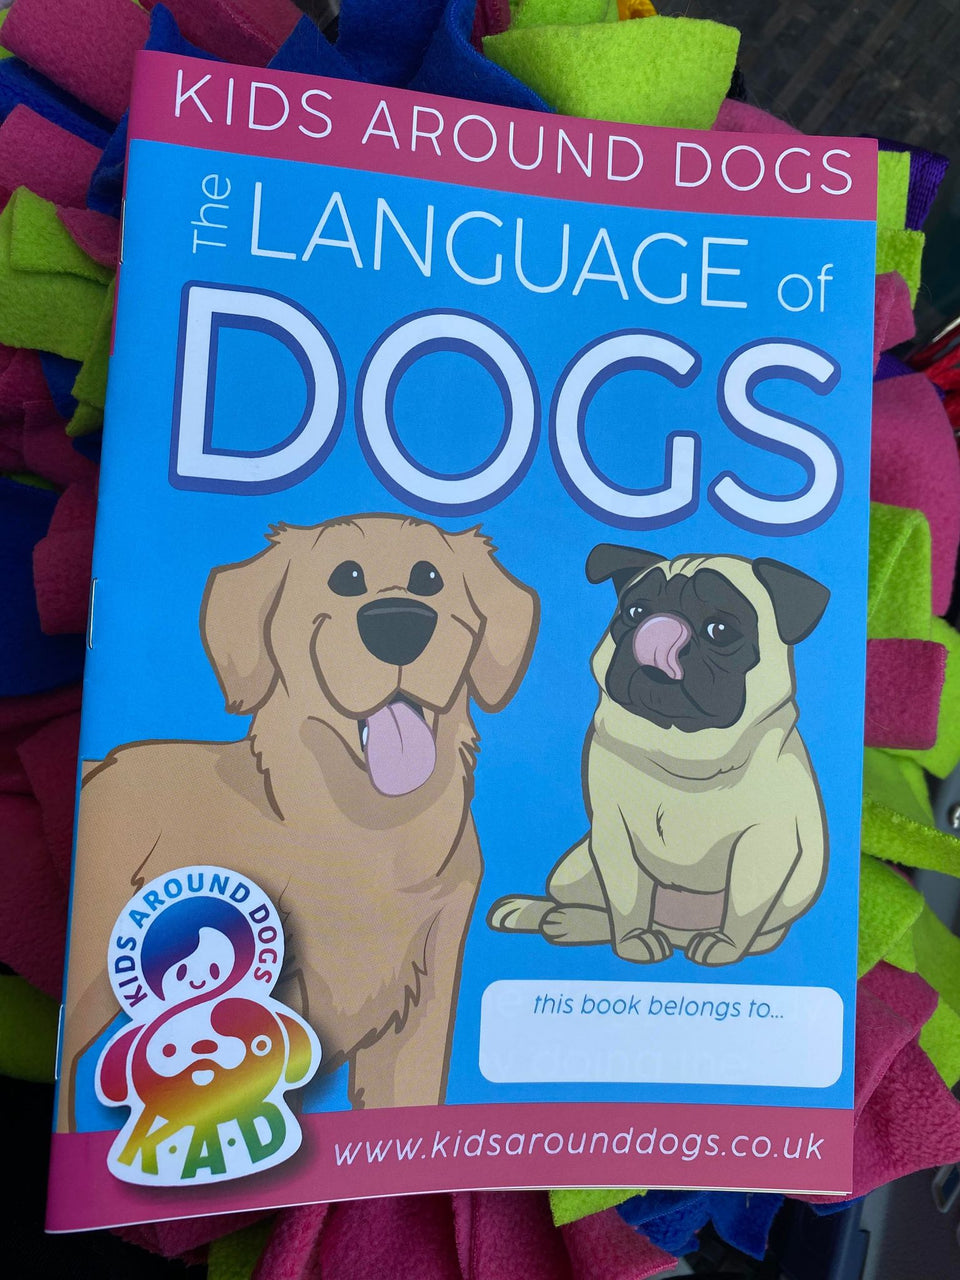 The Language of Dogs Booklet